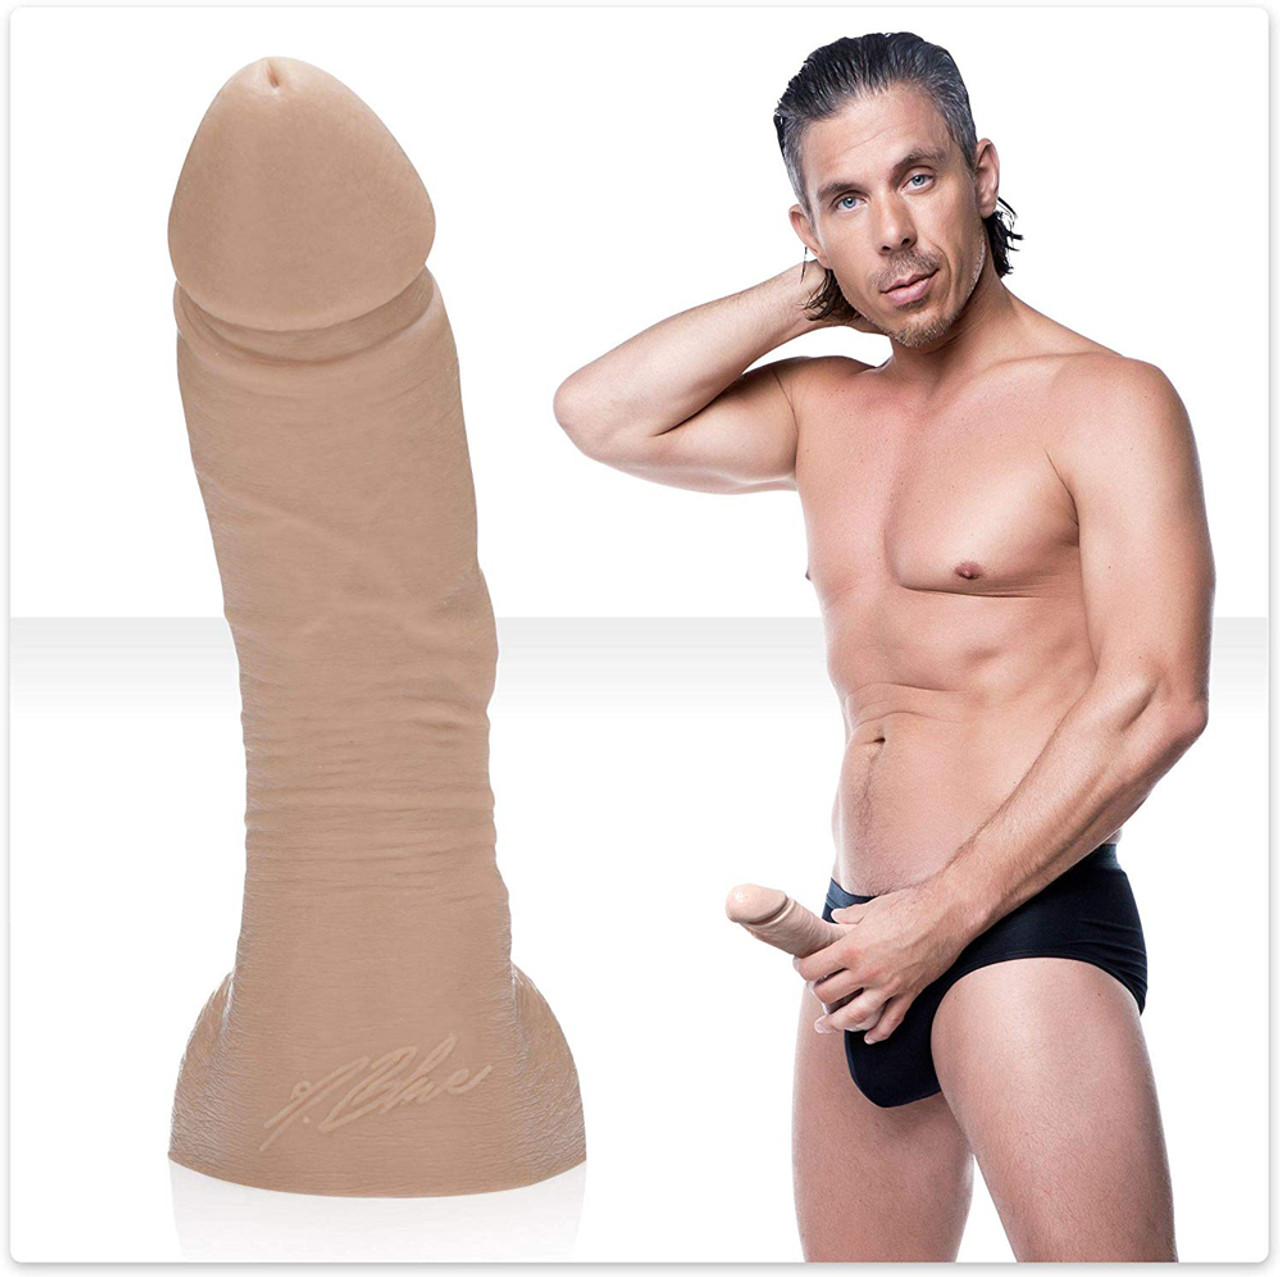 Best of Mick blue penis size